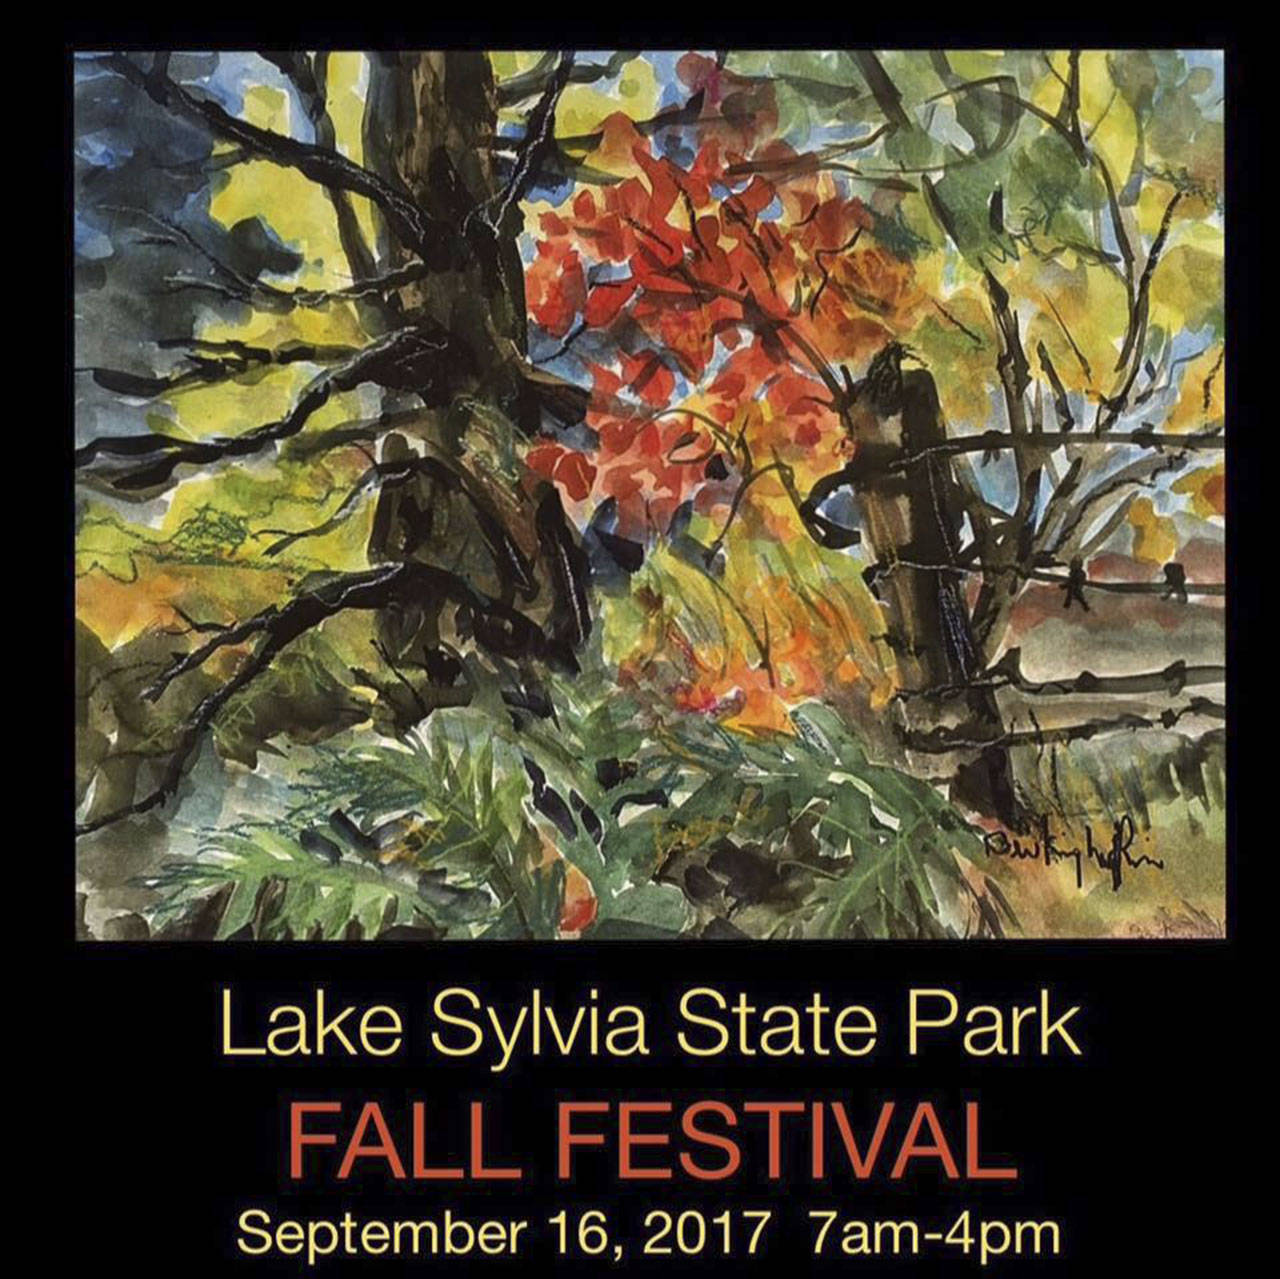 This year’s festival poster was designed by Beverly Lufkin, who painted it just prior to her death on July 3 as a gift to the state parks and FOSLS.